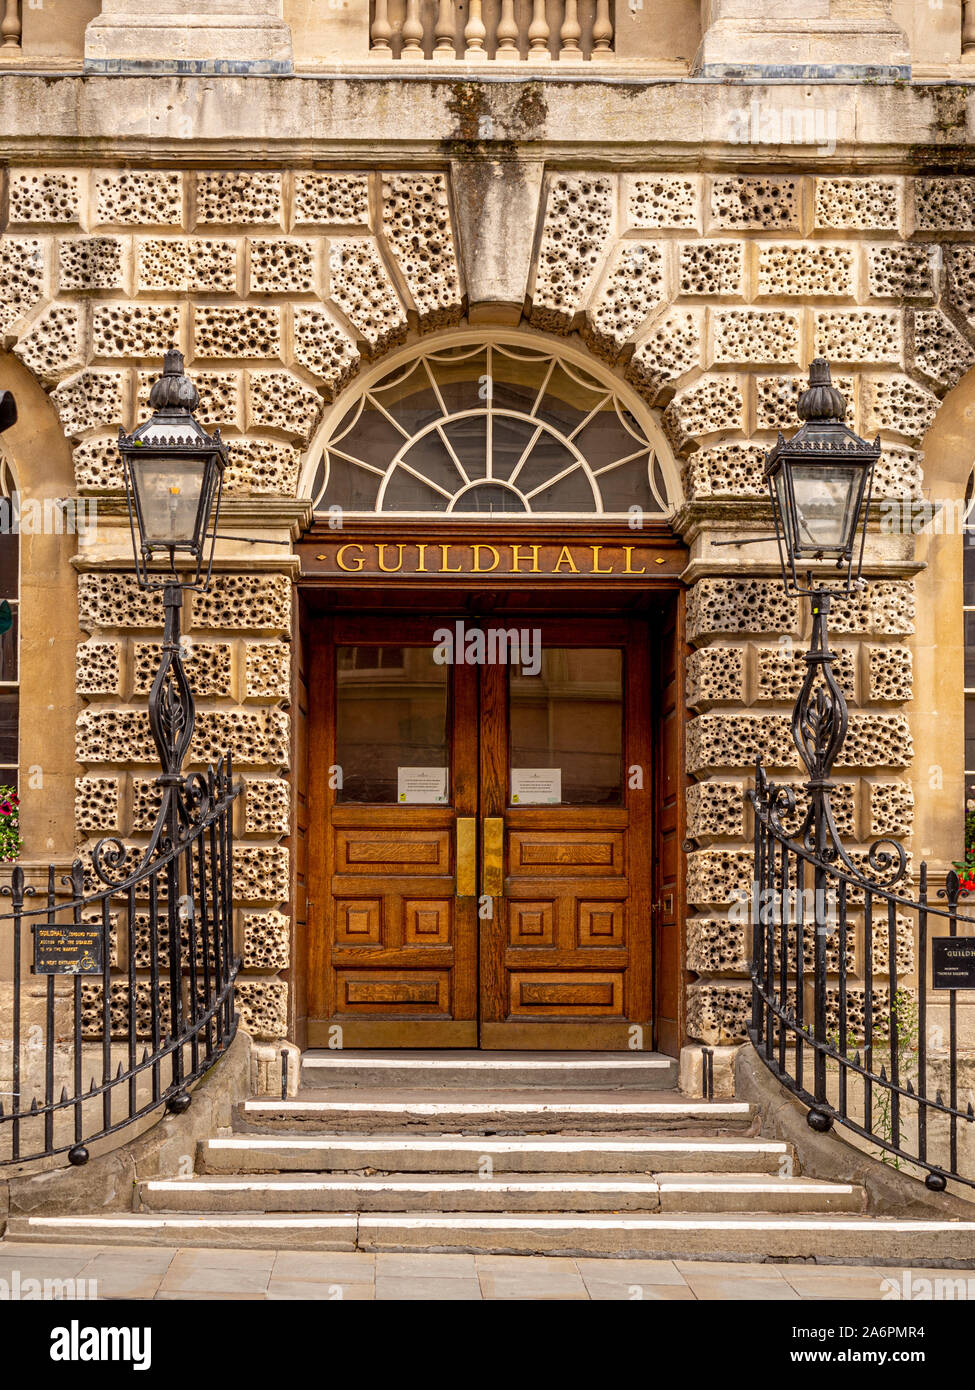 The Guildhall, a Grade 1 listed municipal building in Bath, Somerset, England. Stock Photo